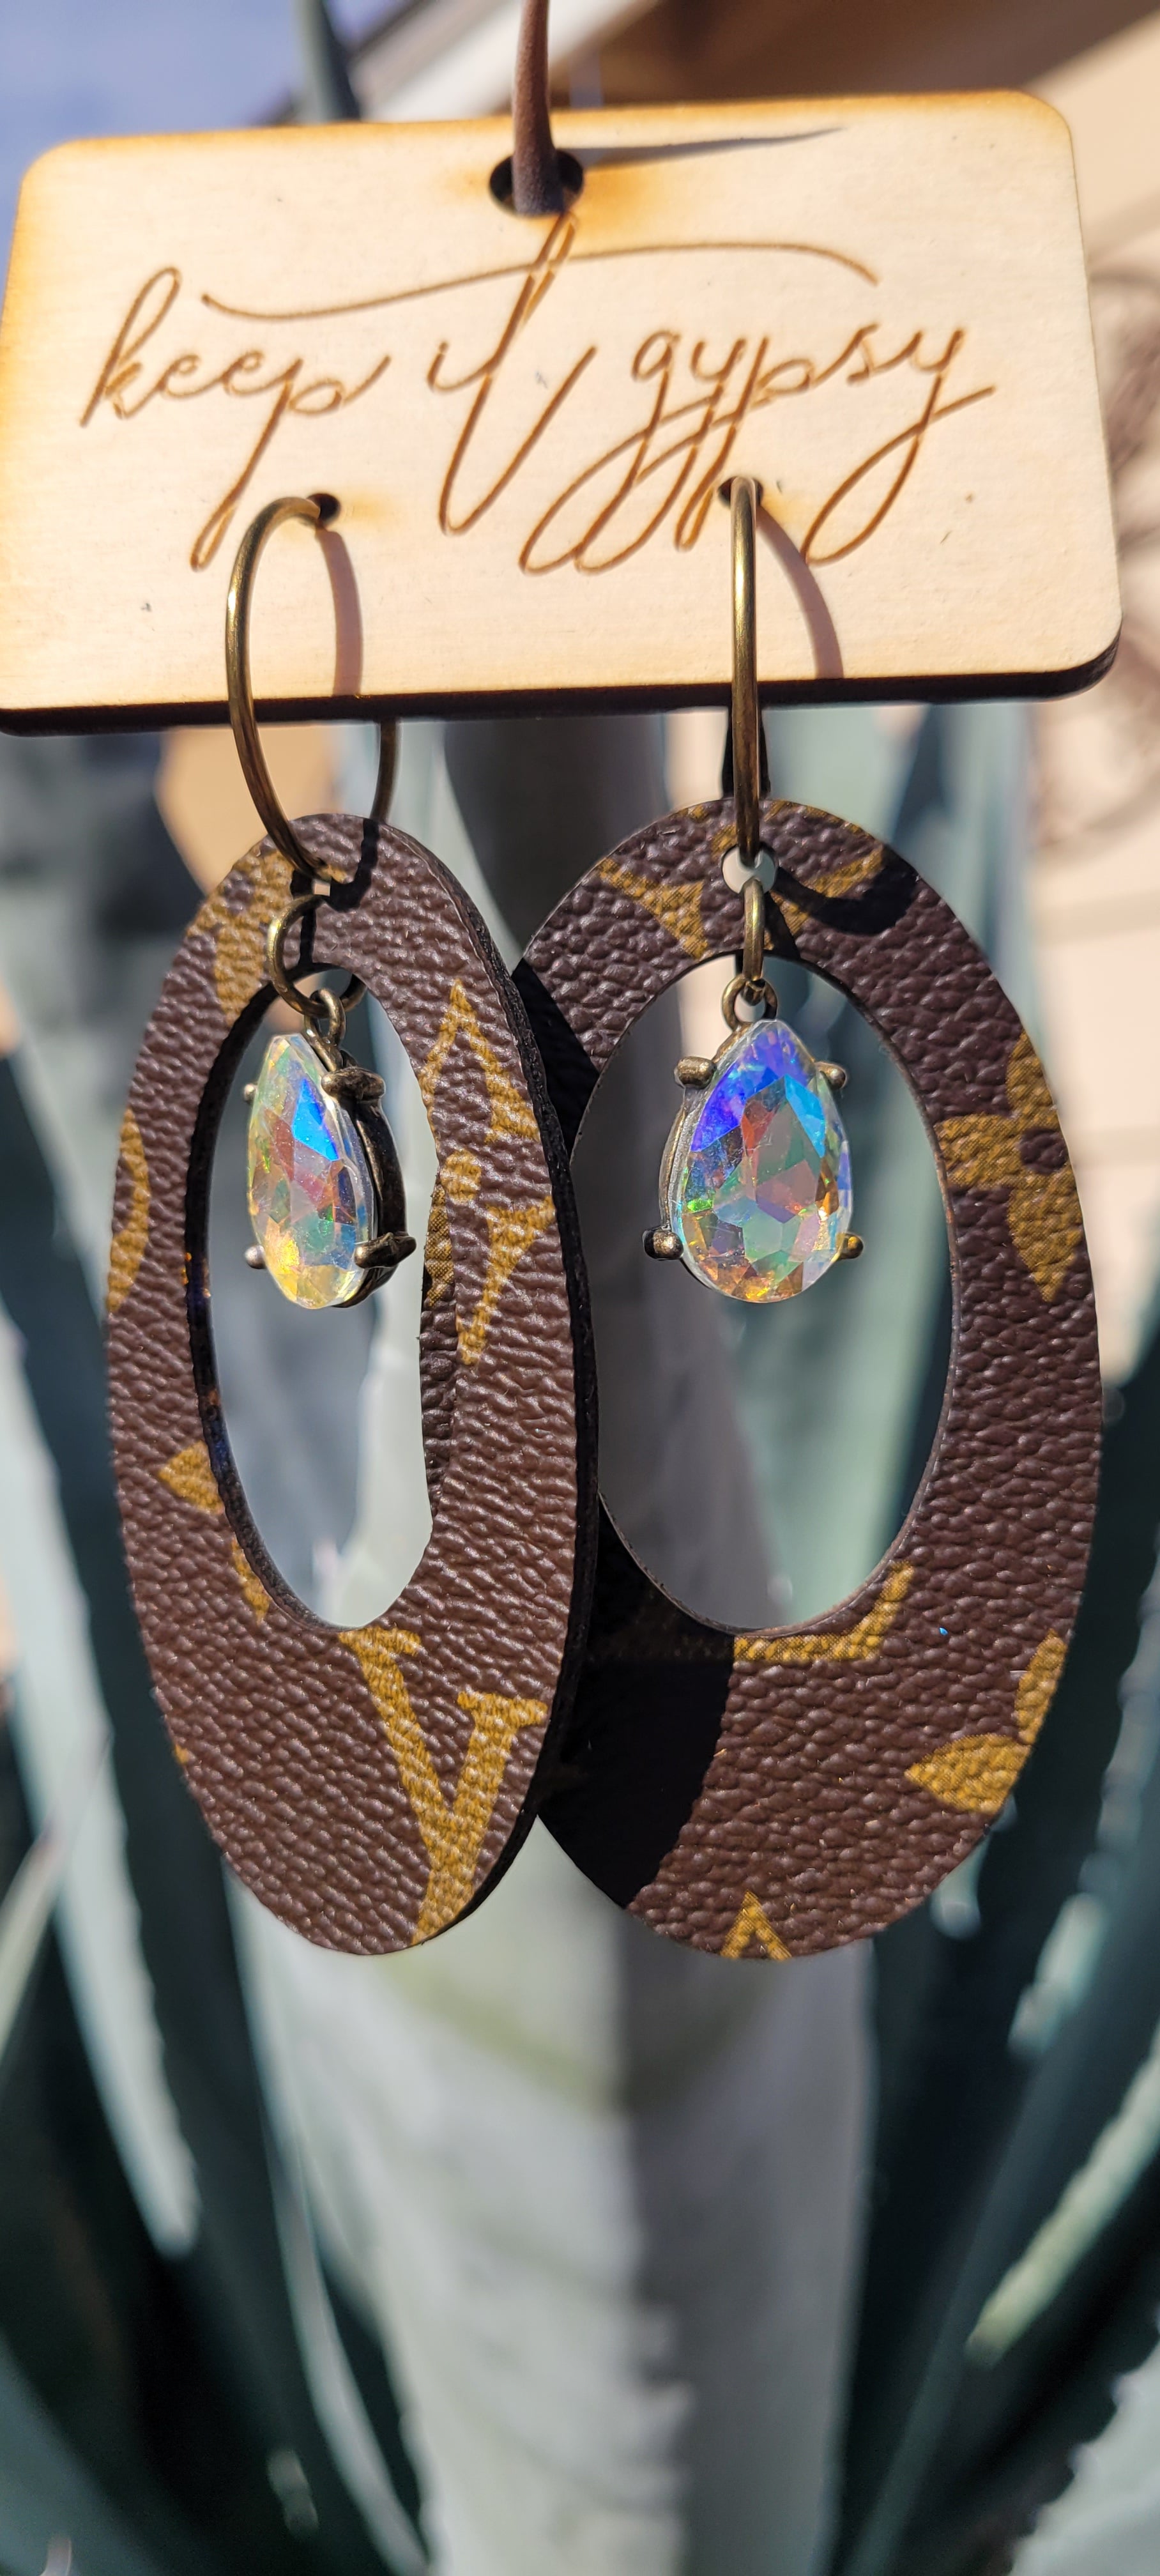 Upcycled Earrings Brown with AB Crystal  Limited supply!    Due to the nature of leather/suede, small variances of color in the skin may occur, this is in no way considered a defect. These are inherent characteristics of leather/suede and will enhance the individual look of your garment.   